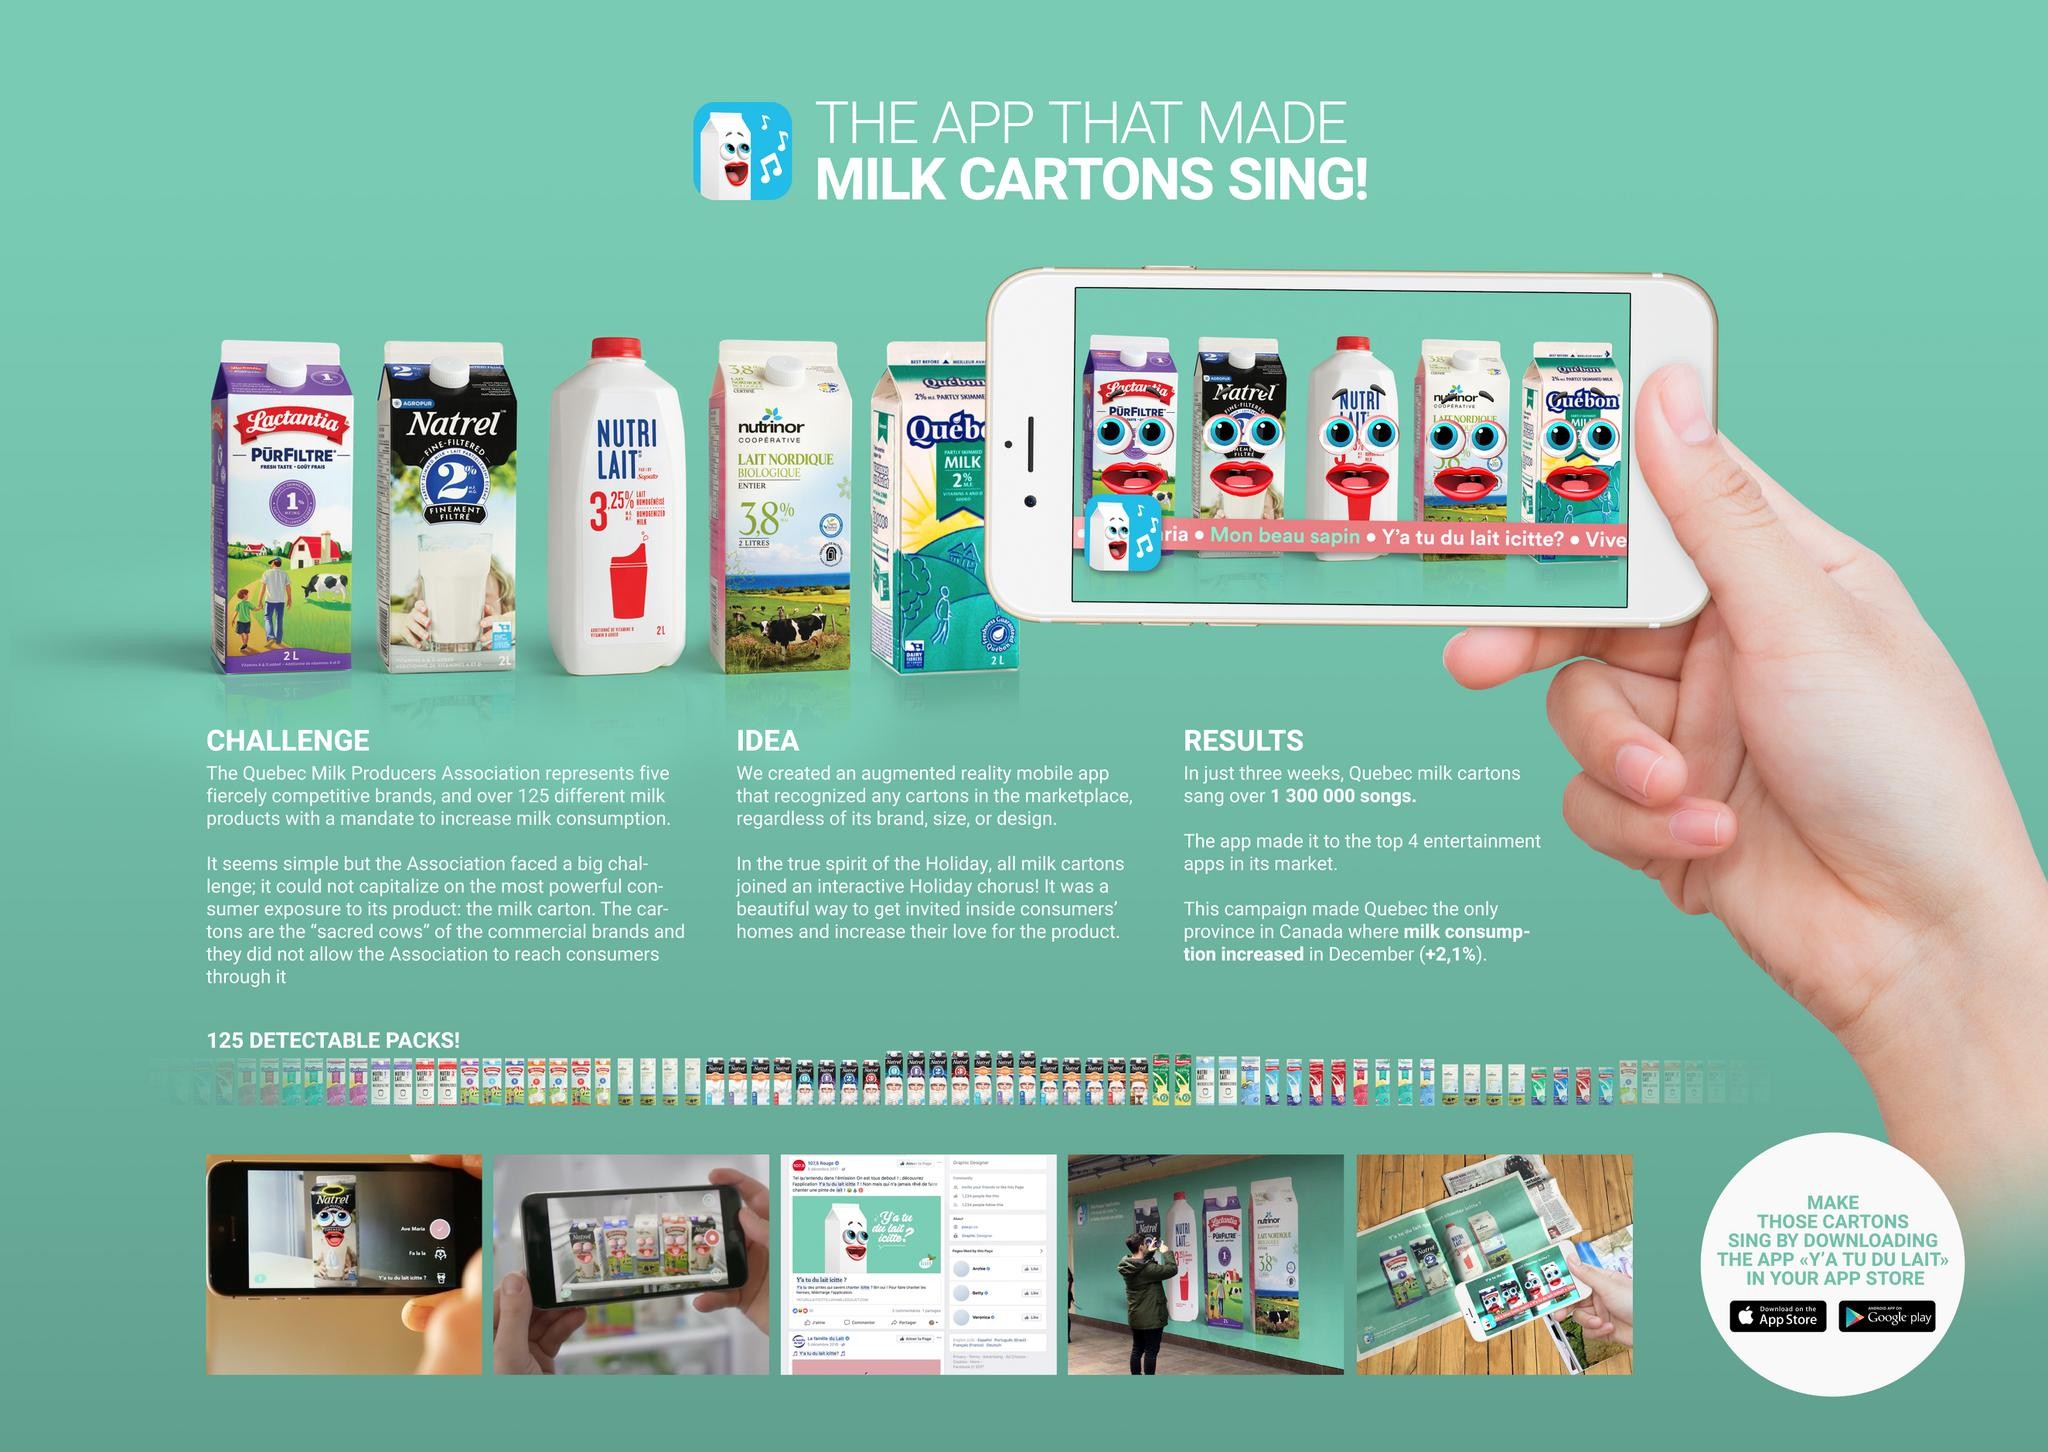 THE APP THAT MADE MILK CARTONS SING!